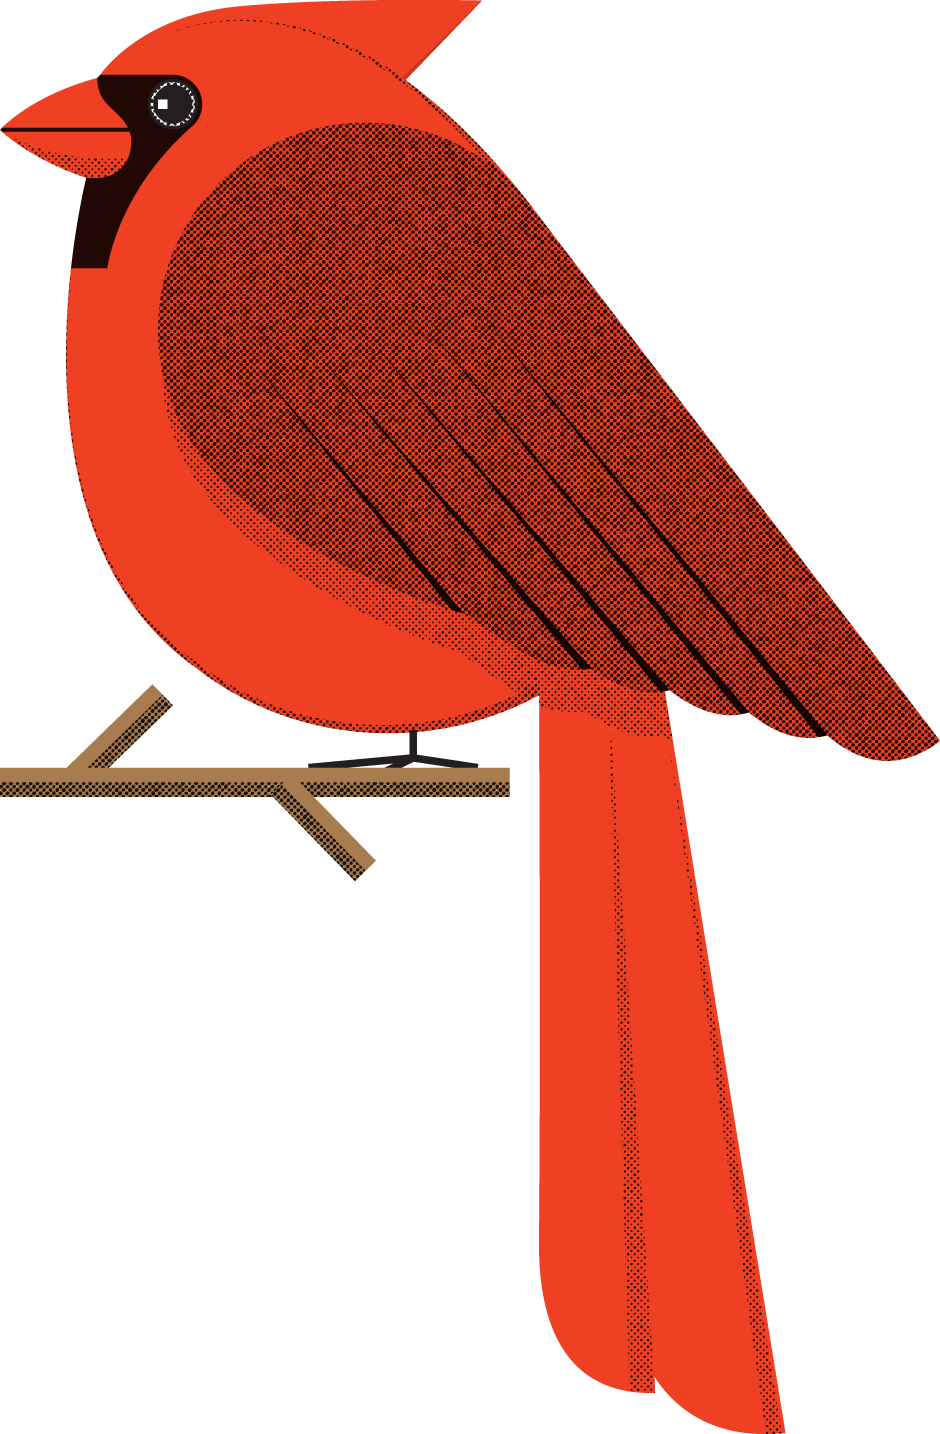 Halftone tint pack texture applied to bird's wing.